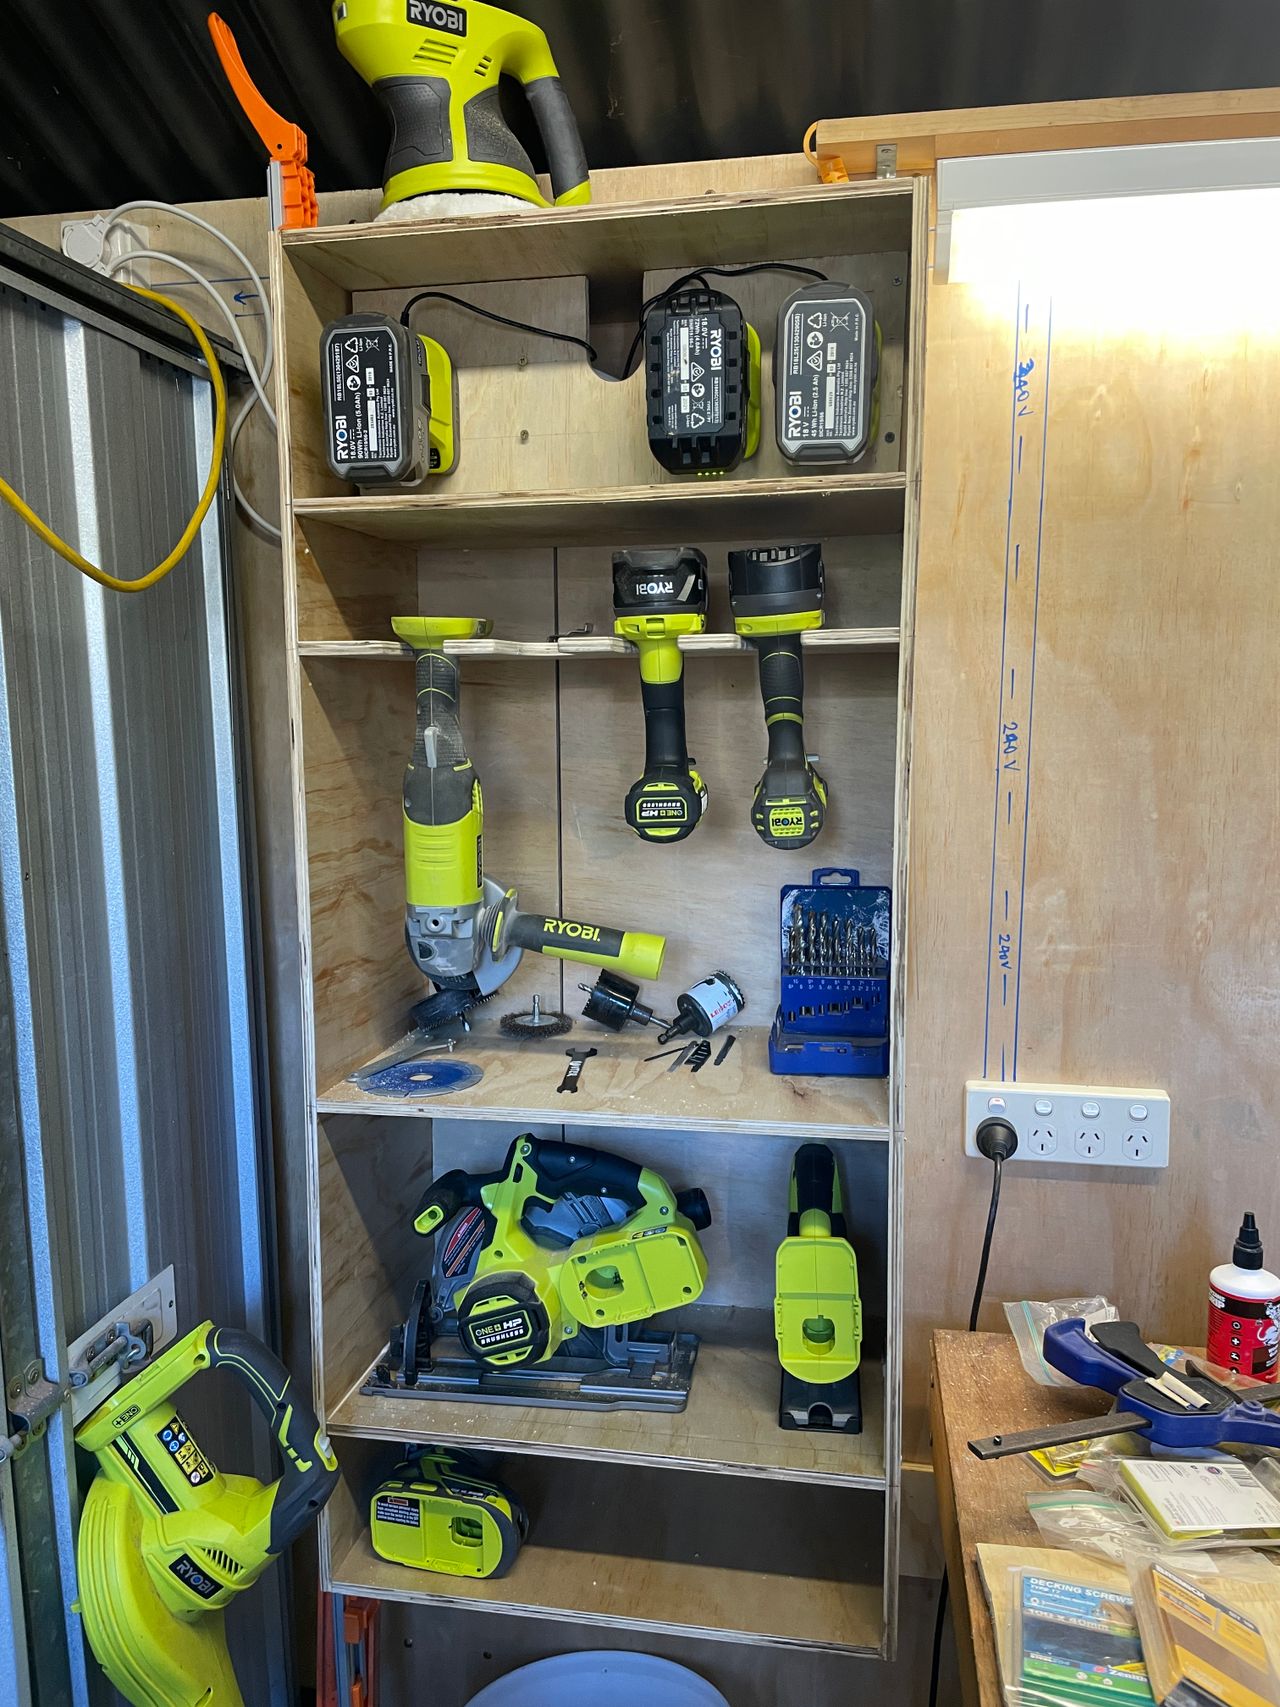 I use to keep all my tool in a bag and forever waste time finding them and accessories so i decided to make myself a storage shelf. It needed to be compact but also house the battery chargers. I started on Friday as it was a public holiday and spent a few hours each day working on the project, many changes to my plans were made along the way, my favourite is the mounted battery chargers so the batteries can be removed one handed. I will be moving house in 10 months so the shelf can be unscrewed and taken to my new home where there will be may projects to complete. Note: i have left room for new tools as you have to plan for the future. As a nurse i can say completing this project has been relaxing and a huge change from my day to day job.